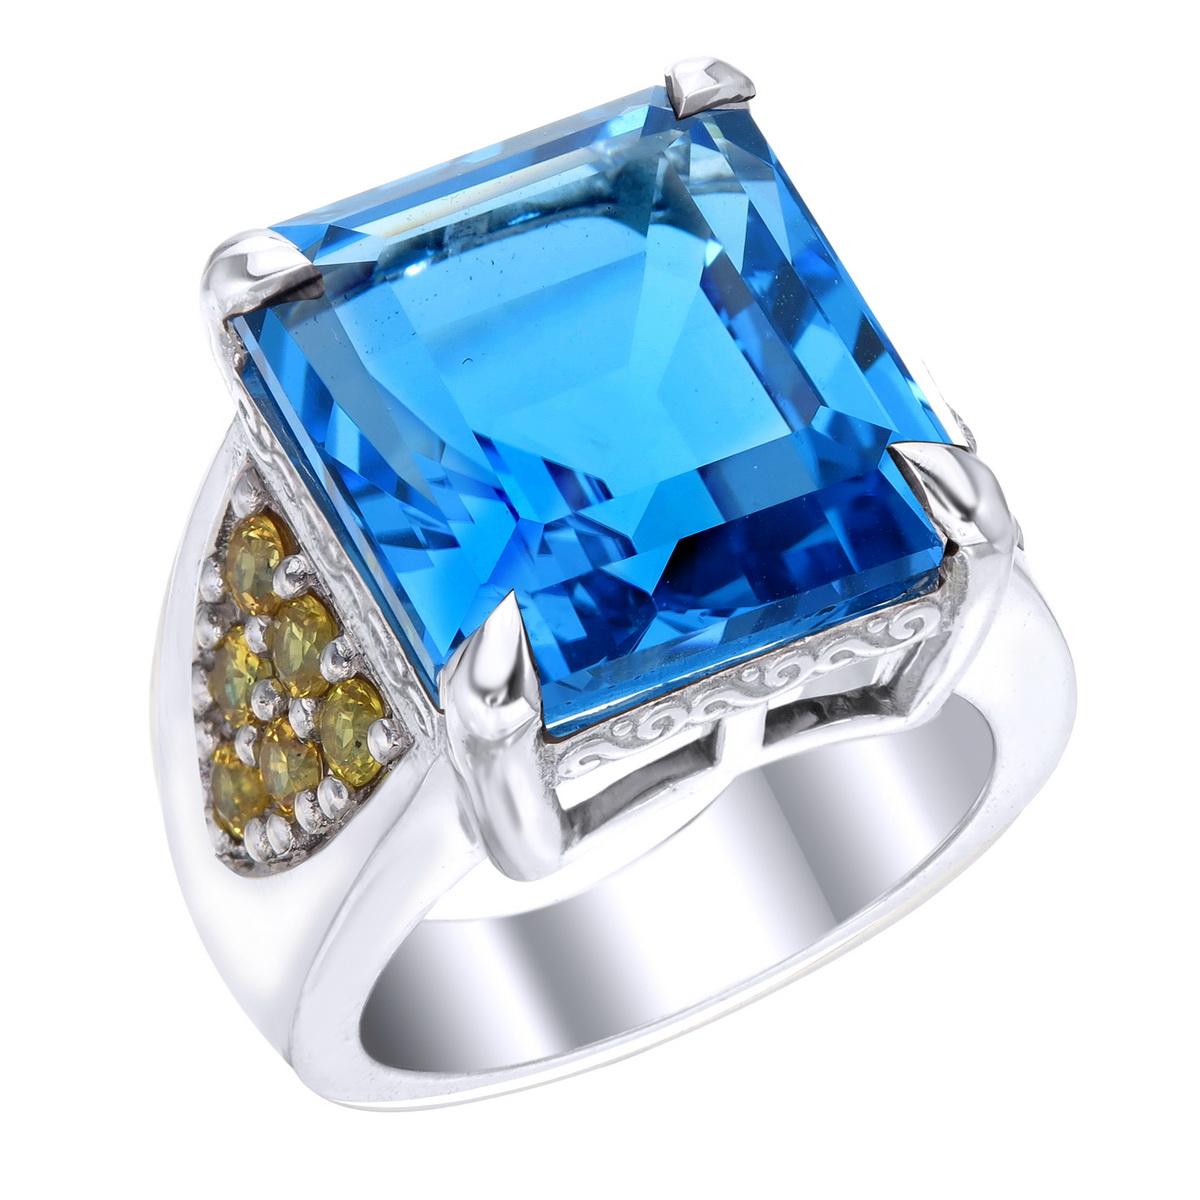 Orloff of Denmark; 24.4 carat Swiss Blue Topaz Sterling Silver Ring set with twelve Fancy Yellow Sapphires.

This piece has been fashioned out of 925 sterling silver, and features a 24 carat Swiss blue topaz held by a claw setting of four sharp